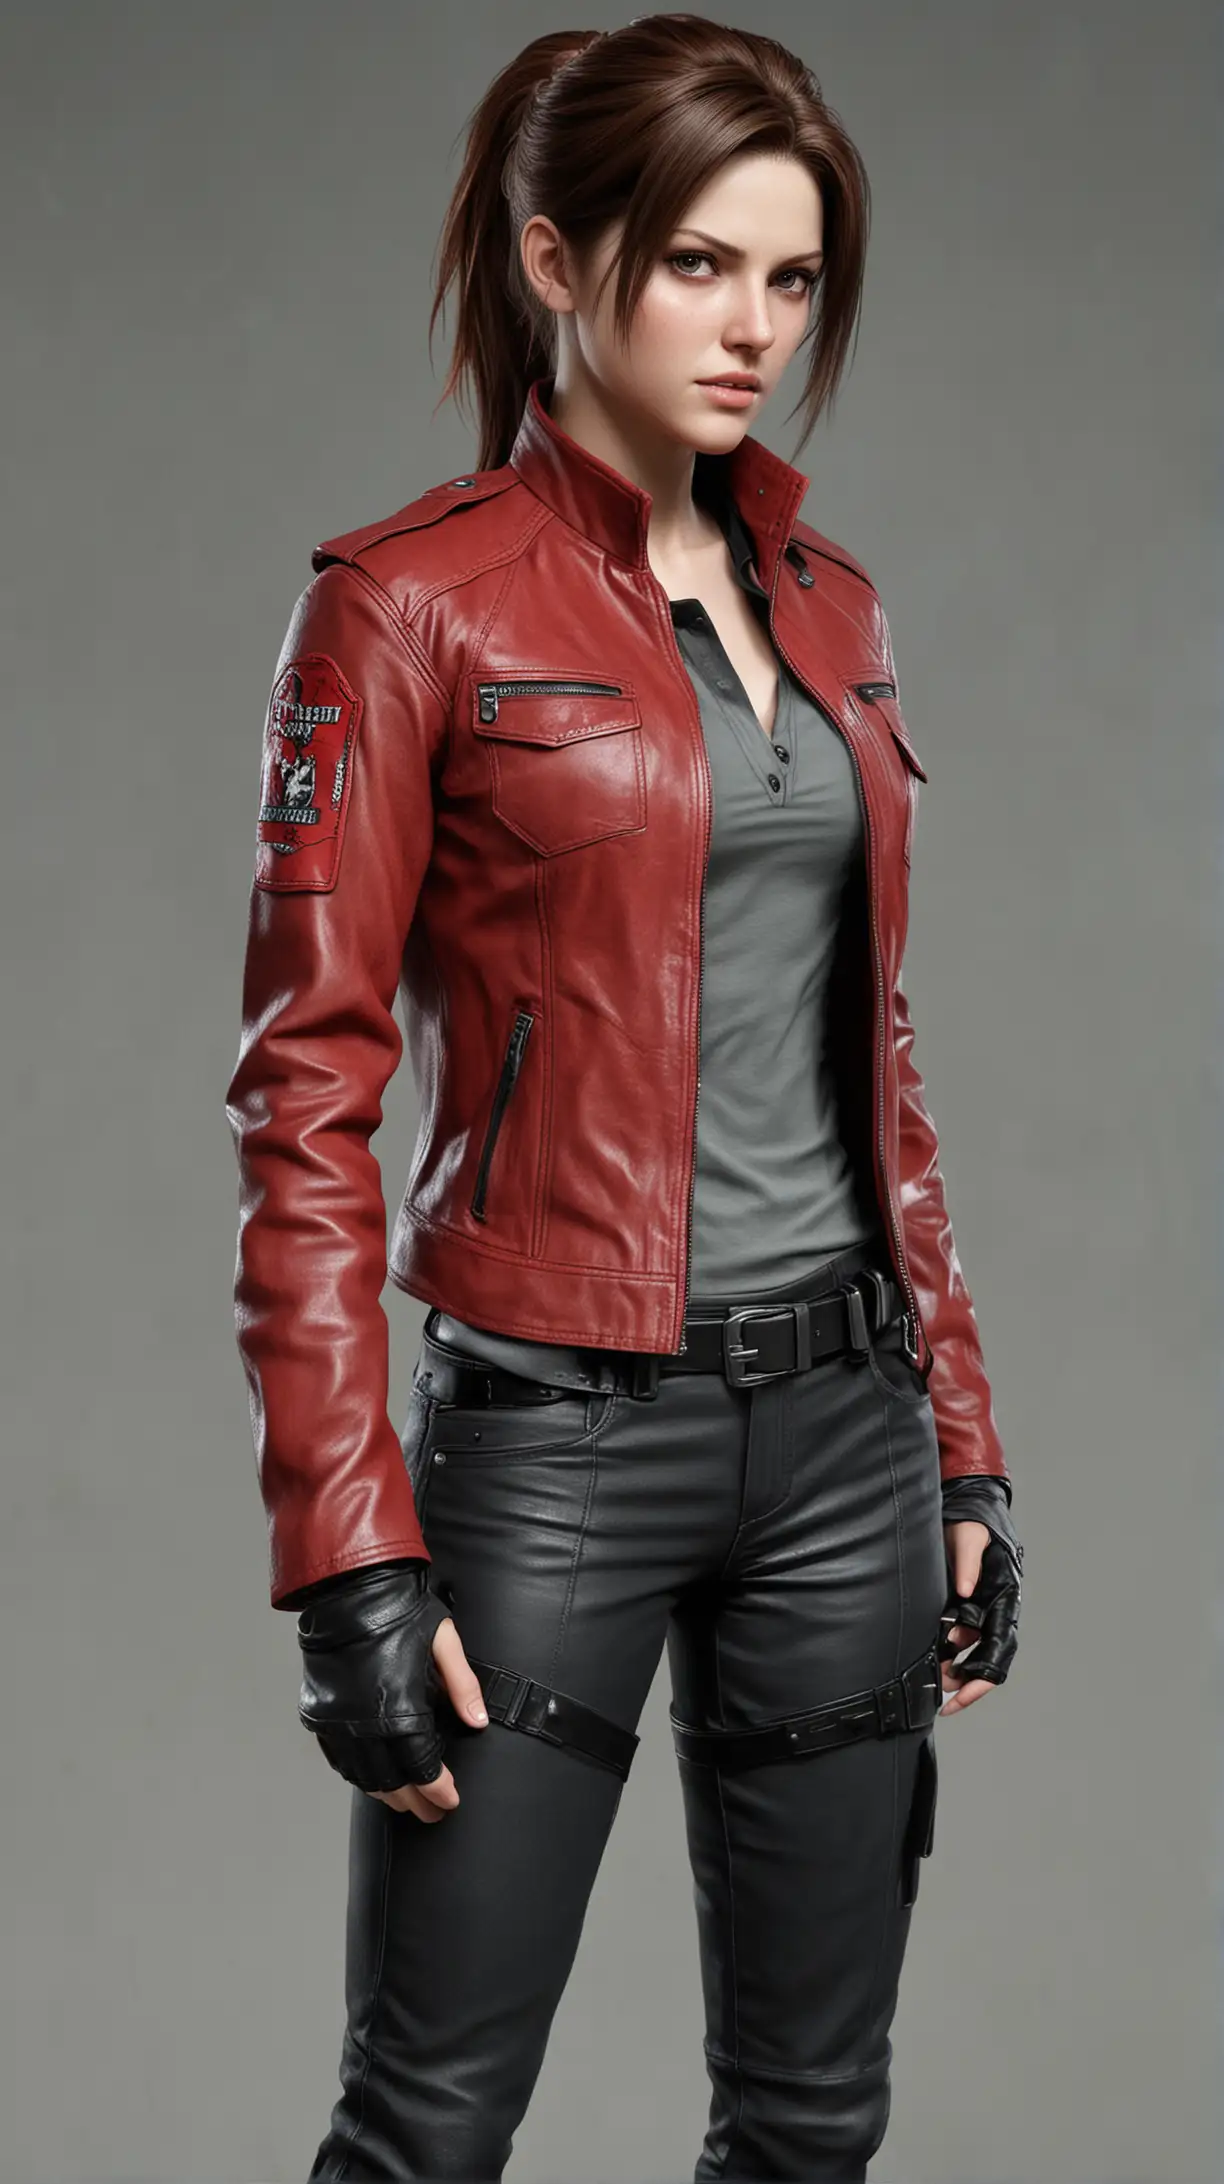 Resident Evil Claire Redfield Cosplay Fearless Female in Red Leather Jacket and Matching Pants